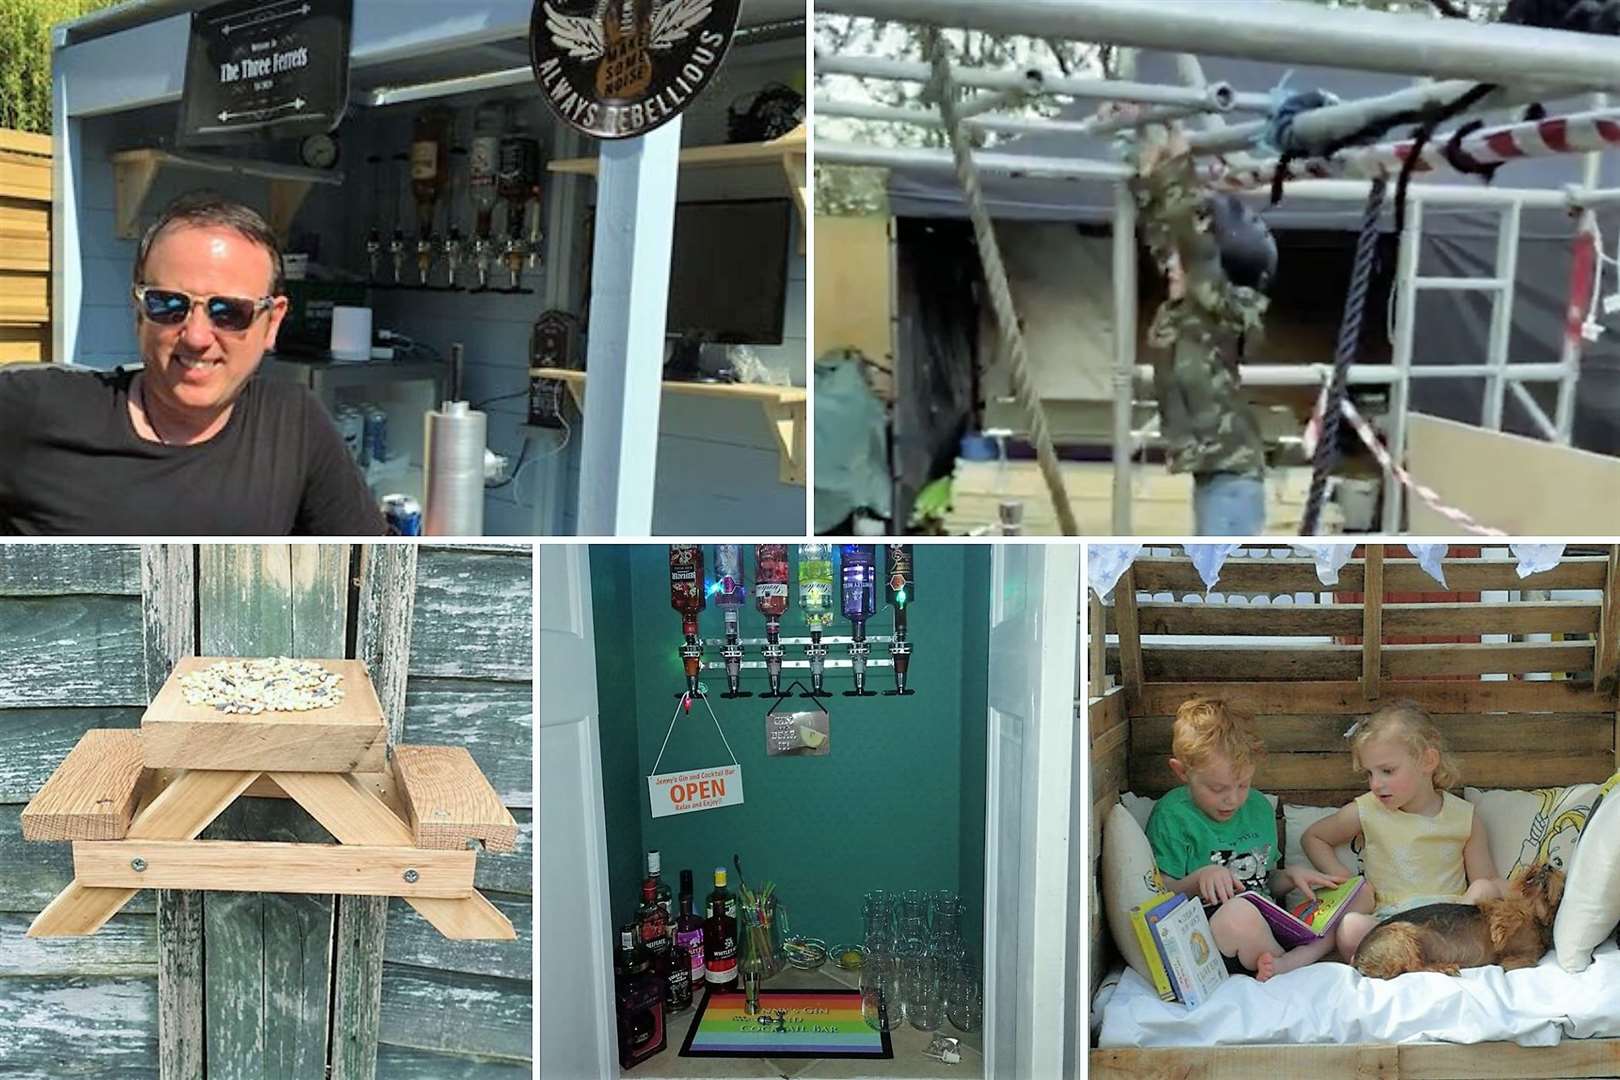 From a homemade 'pub' to a back garden assault course, people in Kent have taken DIY to a new level during lockdown